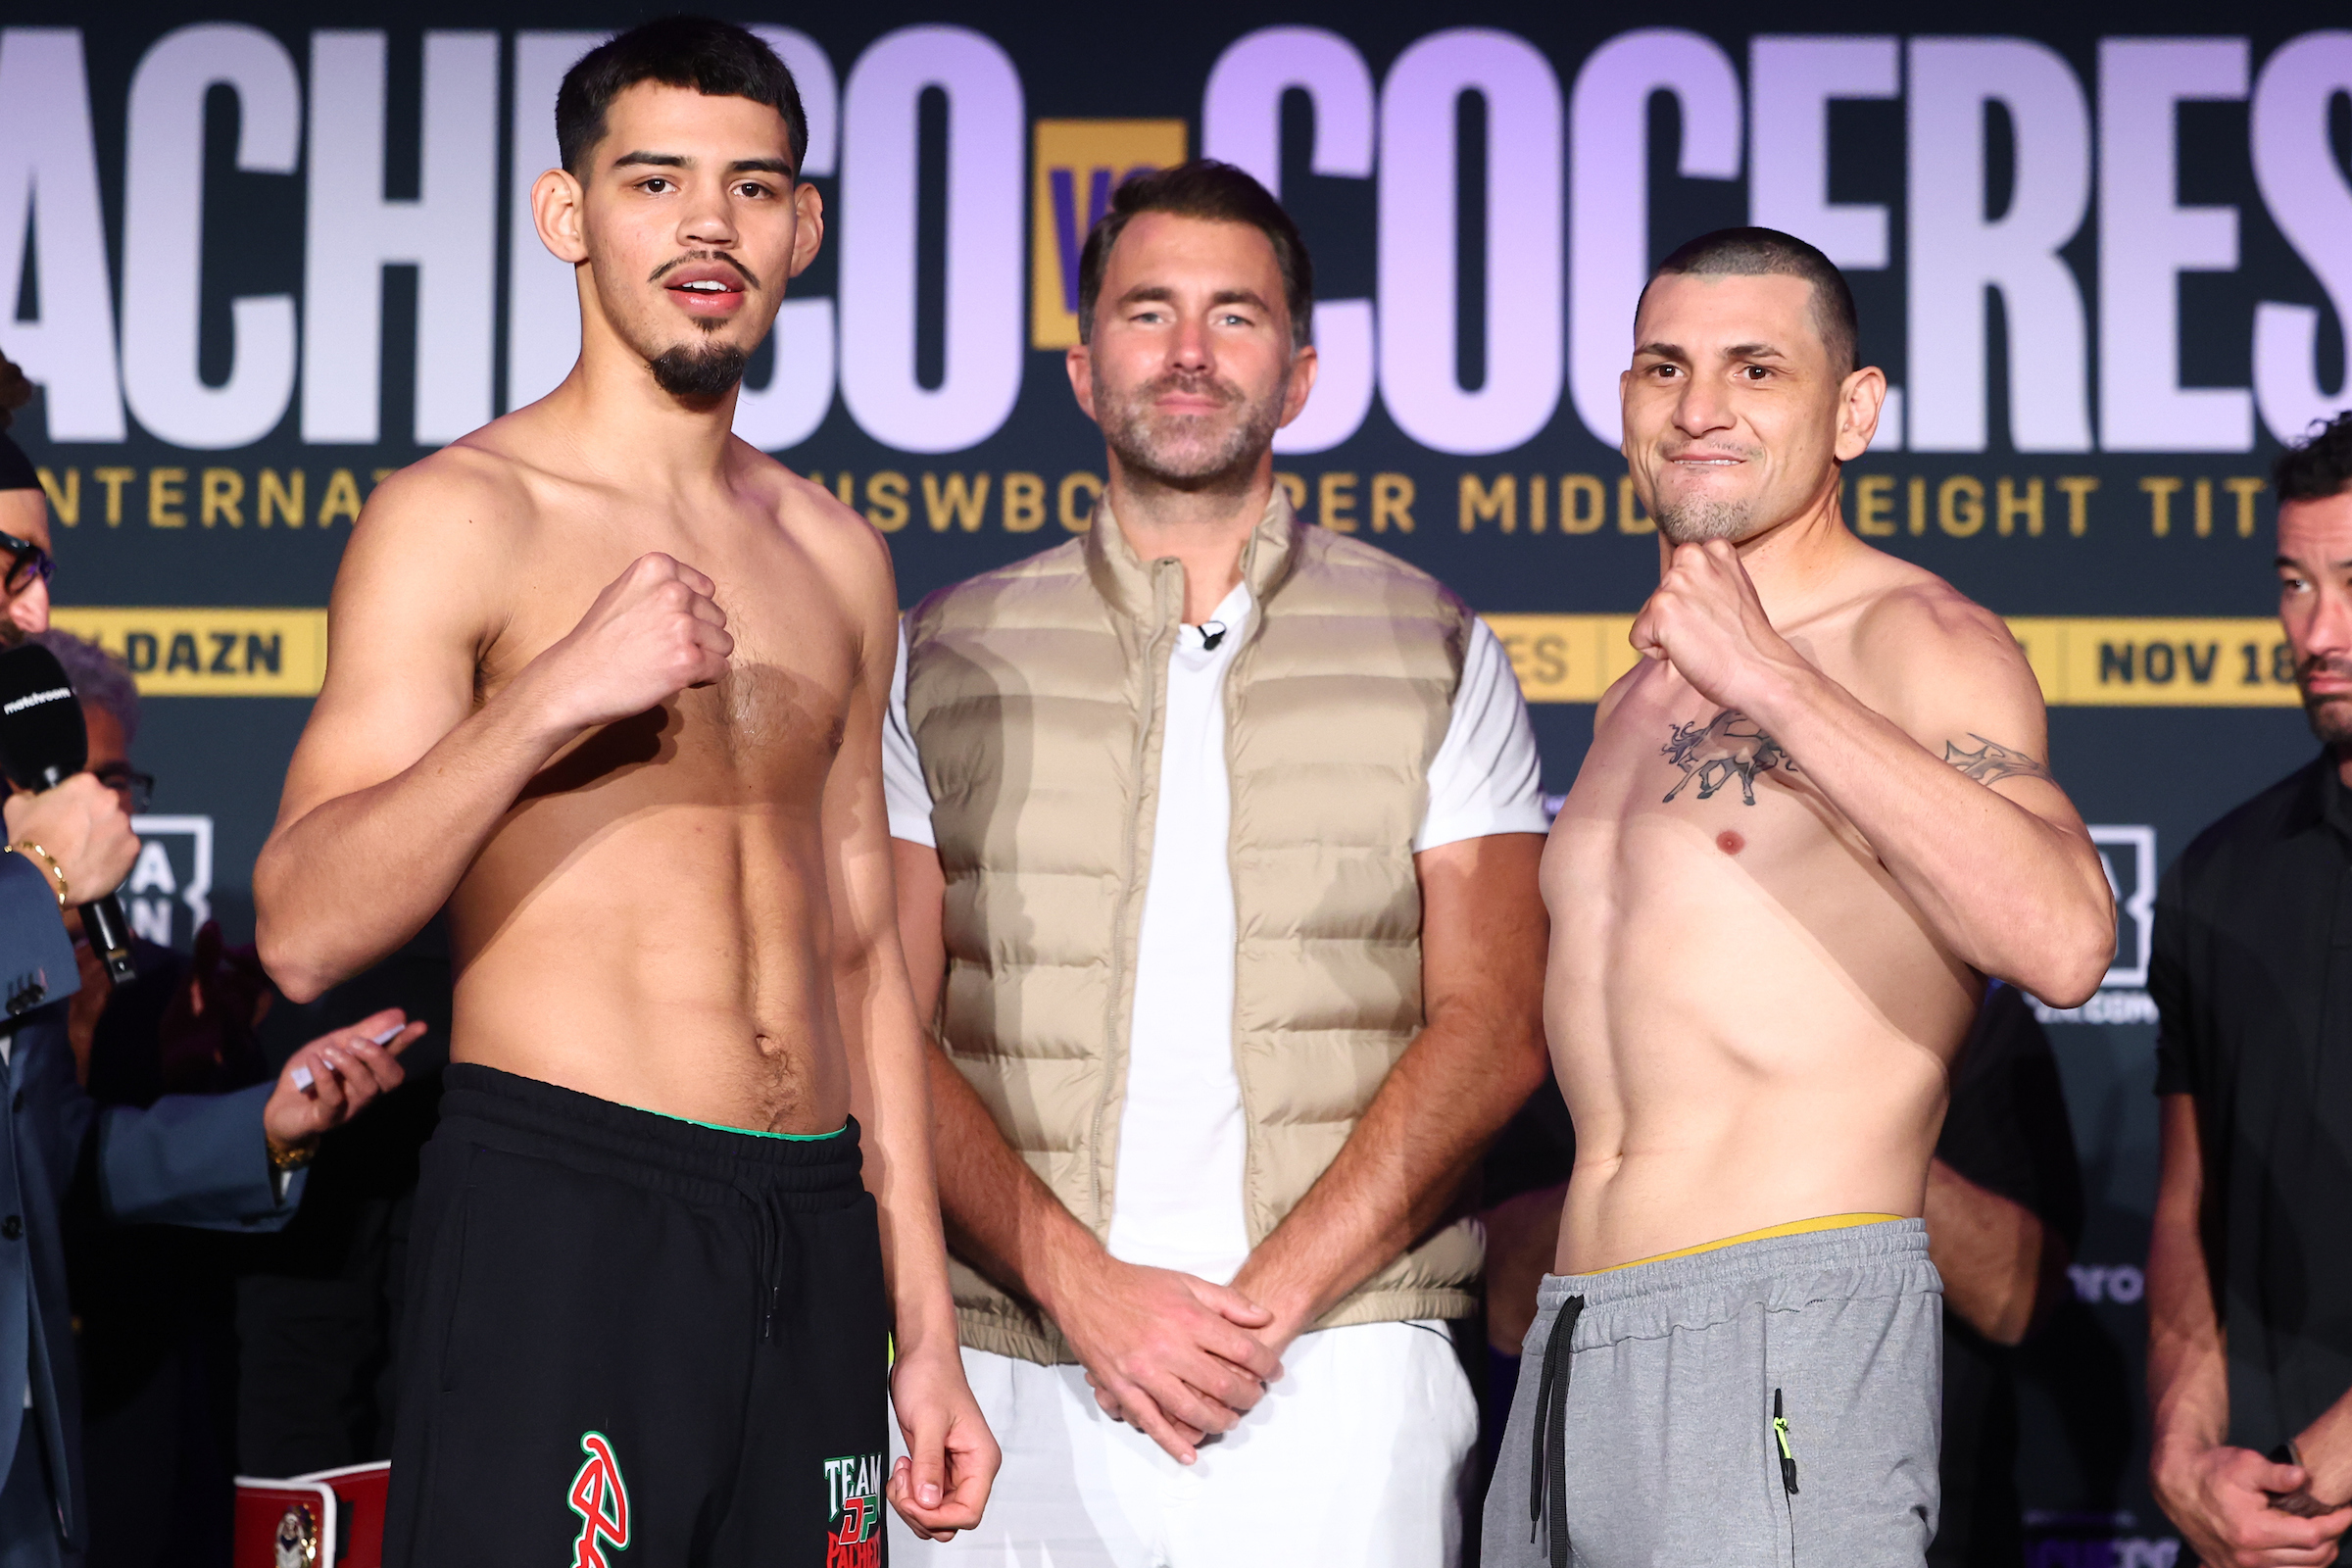 Pacheco vs. Coceres: Weigh-in Results, Betting Odds & Running Order